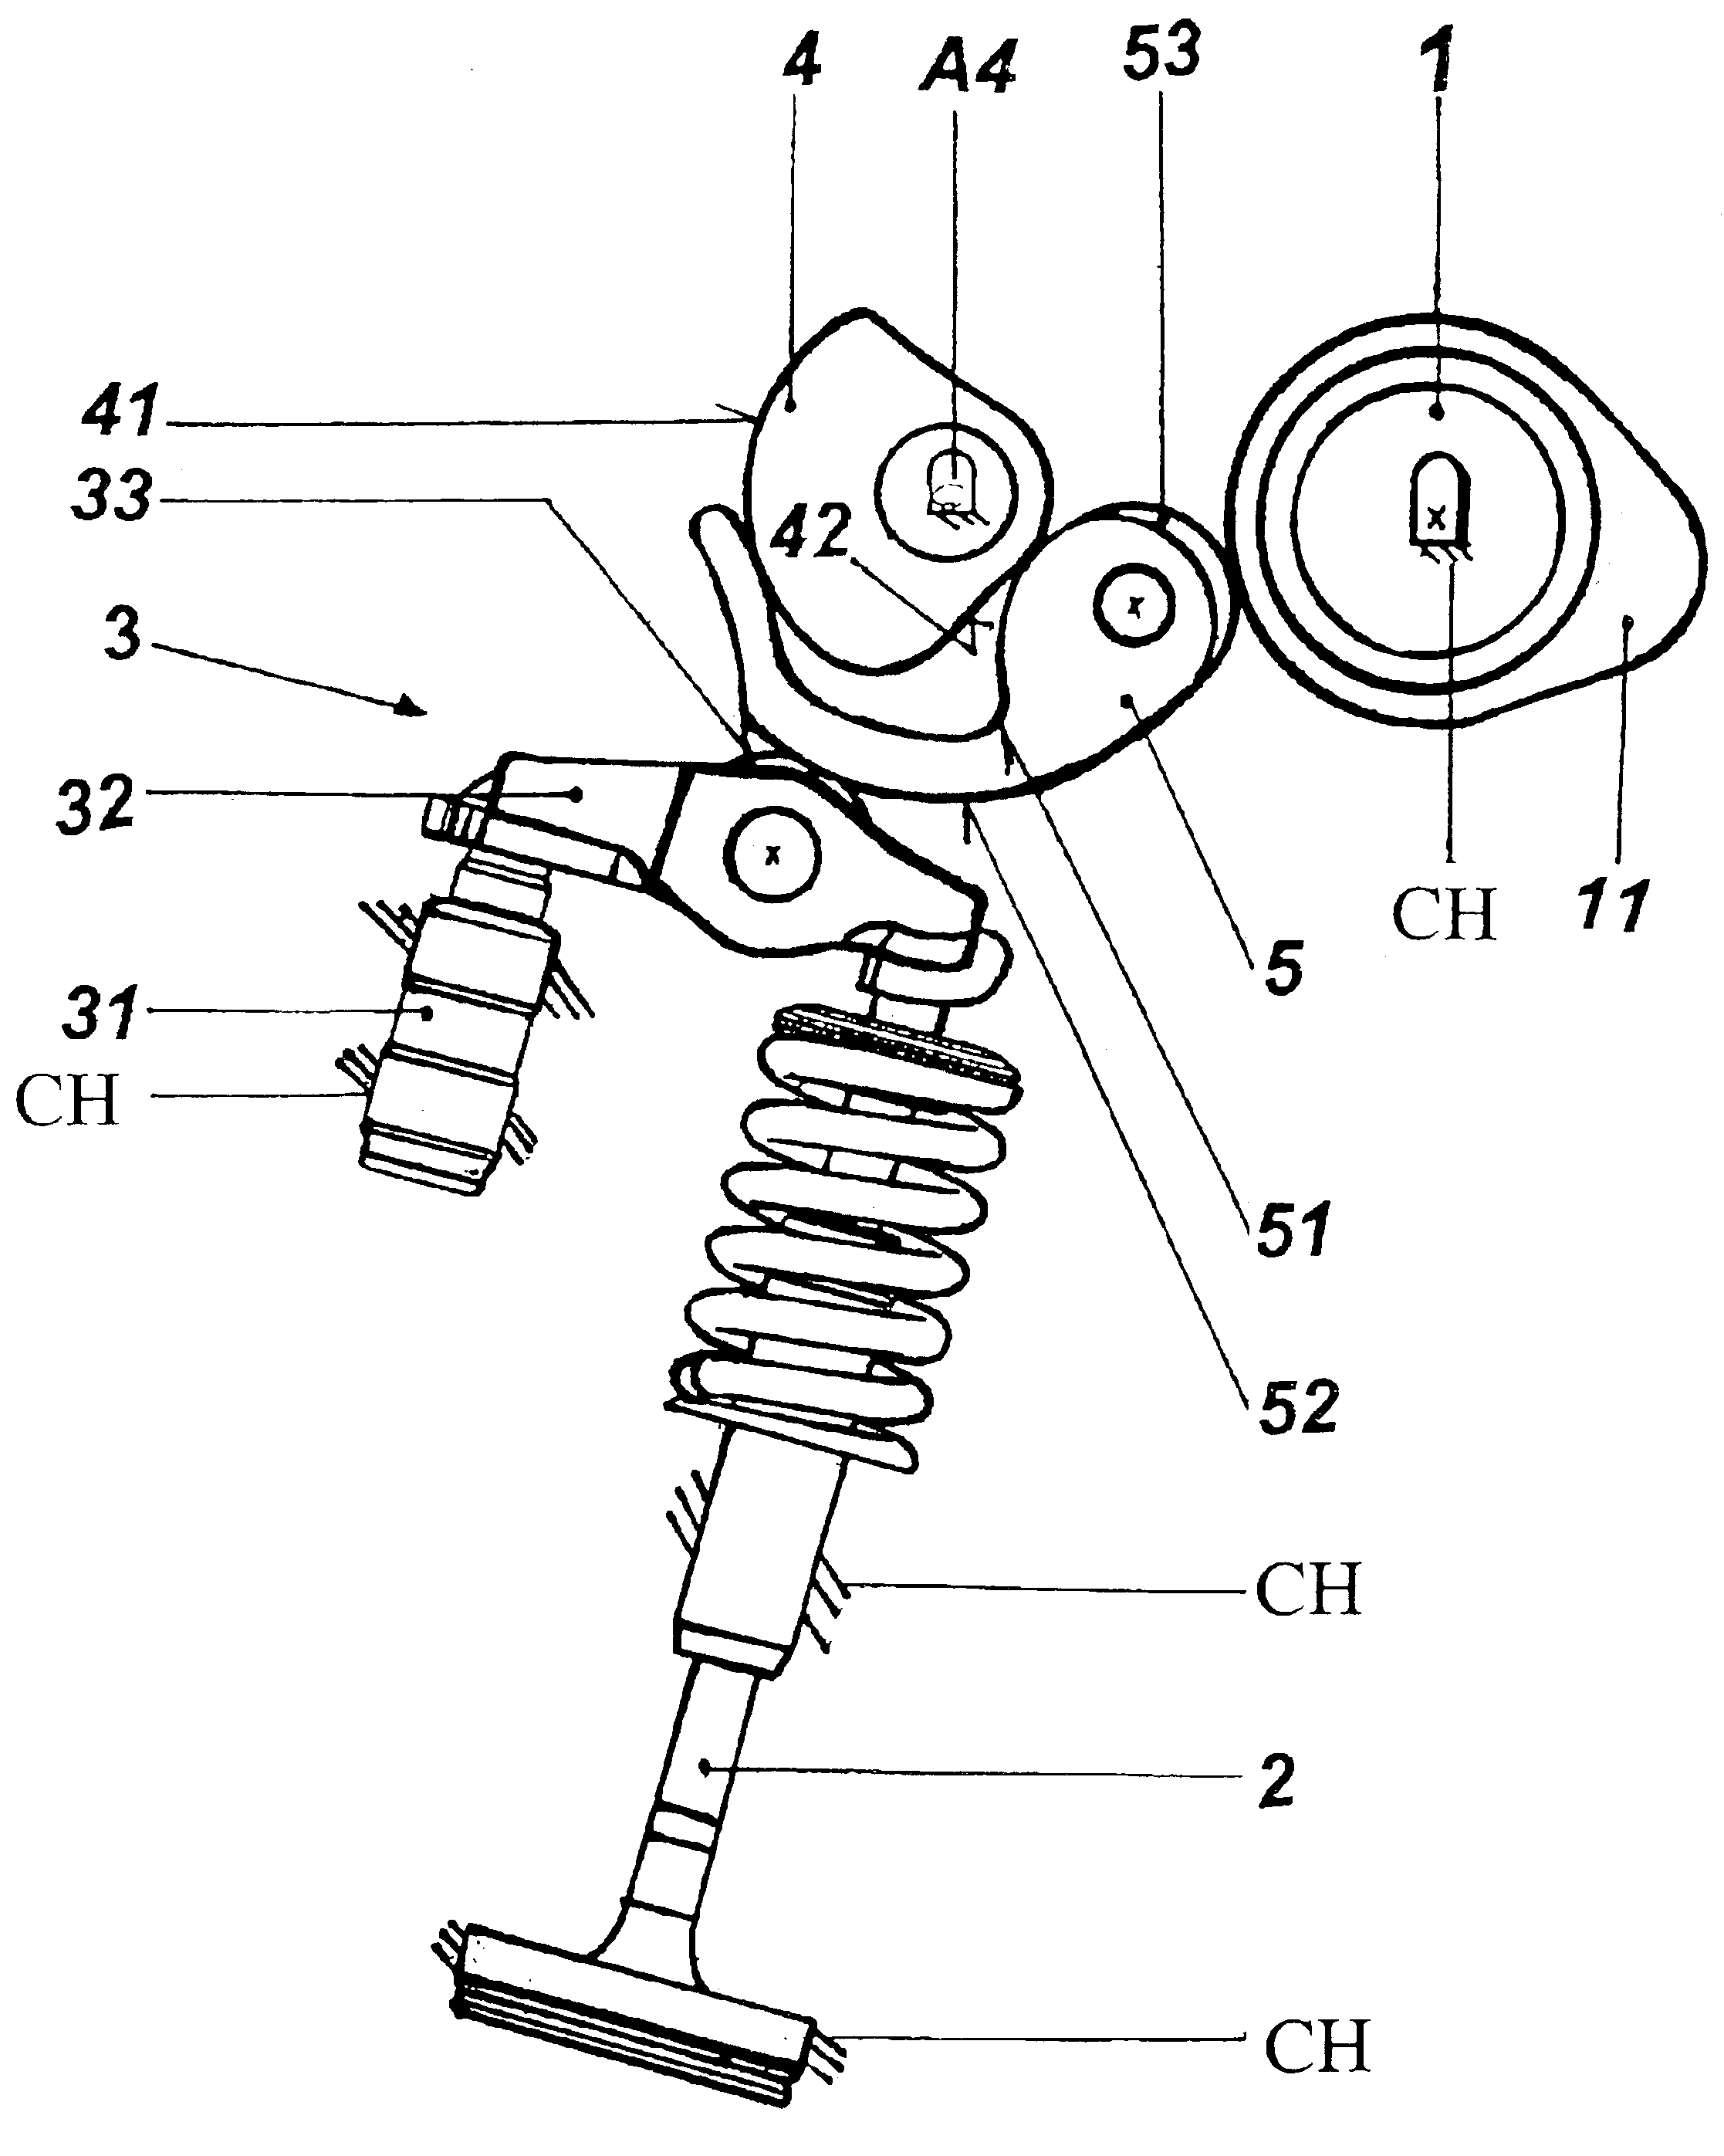 System for variably actuating valves in internal combustion engines